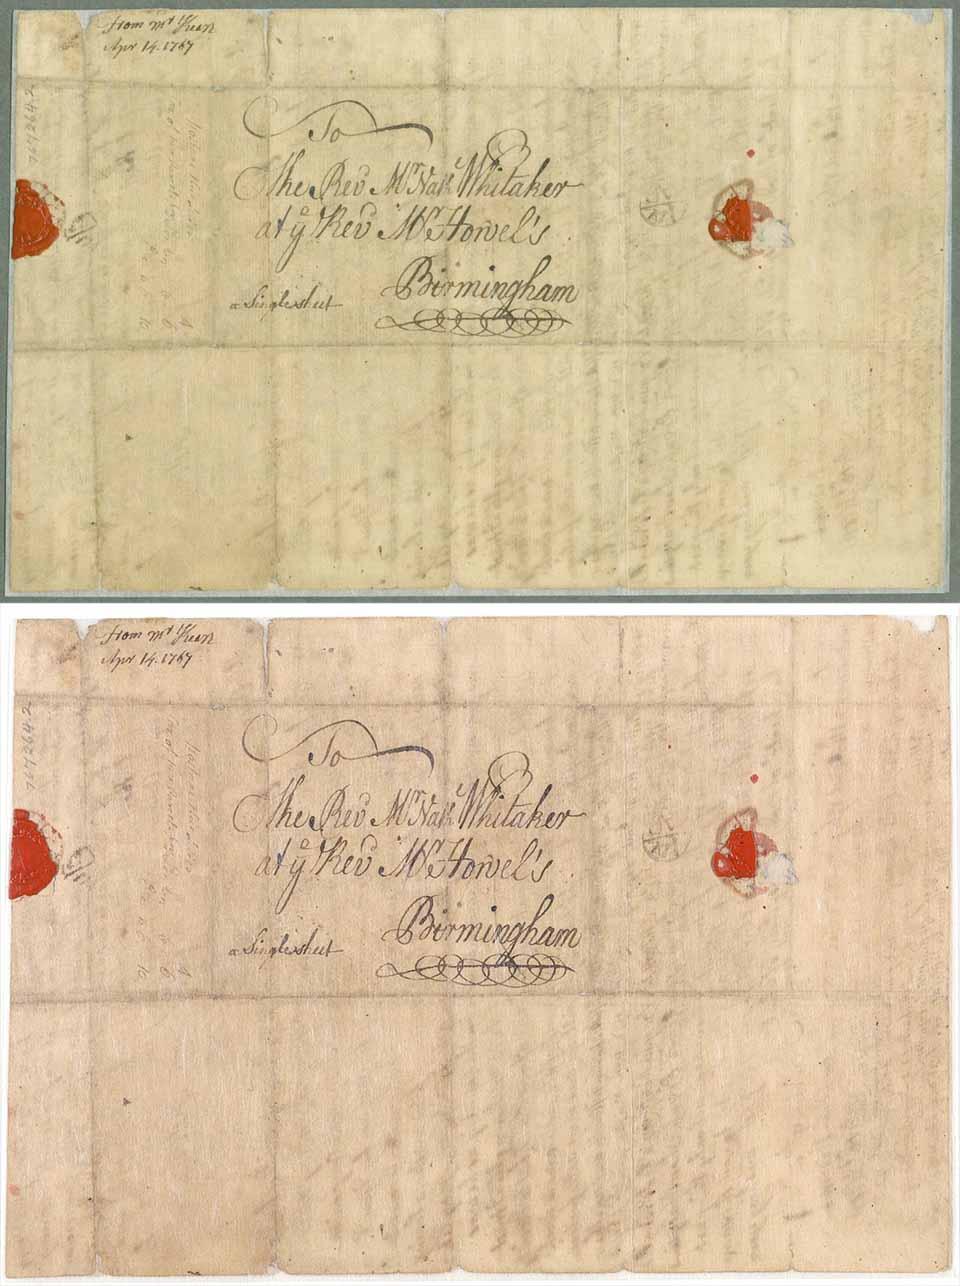 Occom document showing re-digitization differences, before (top), after (bottom)